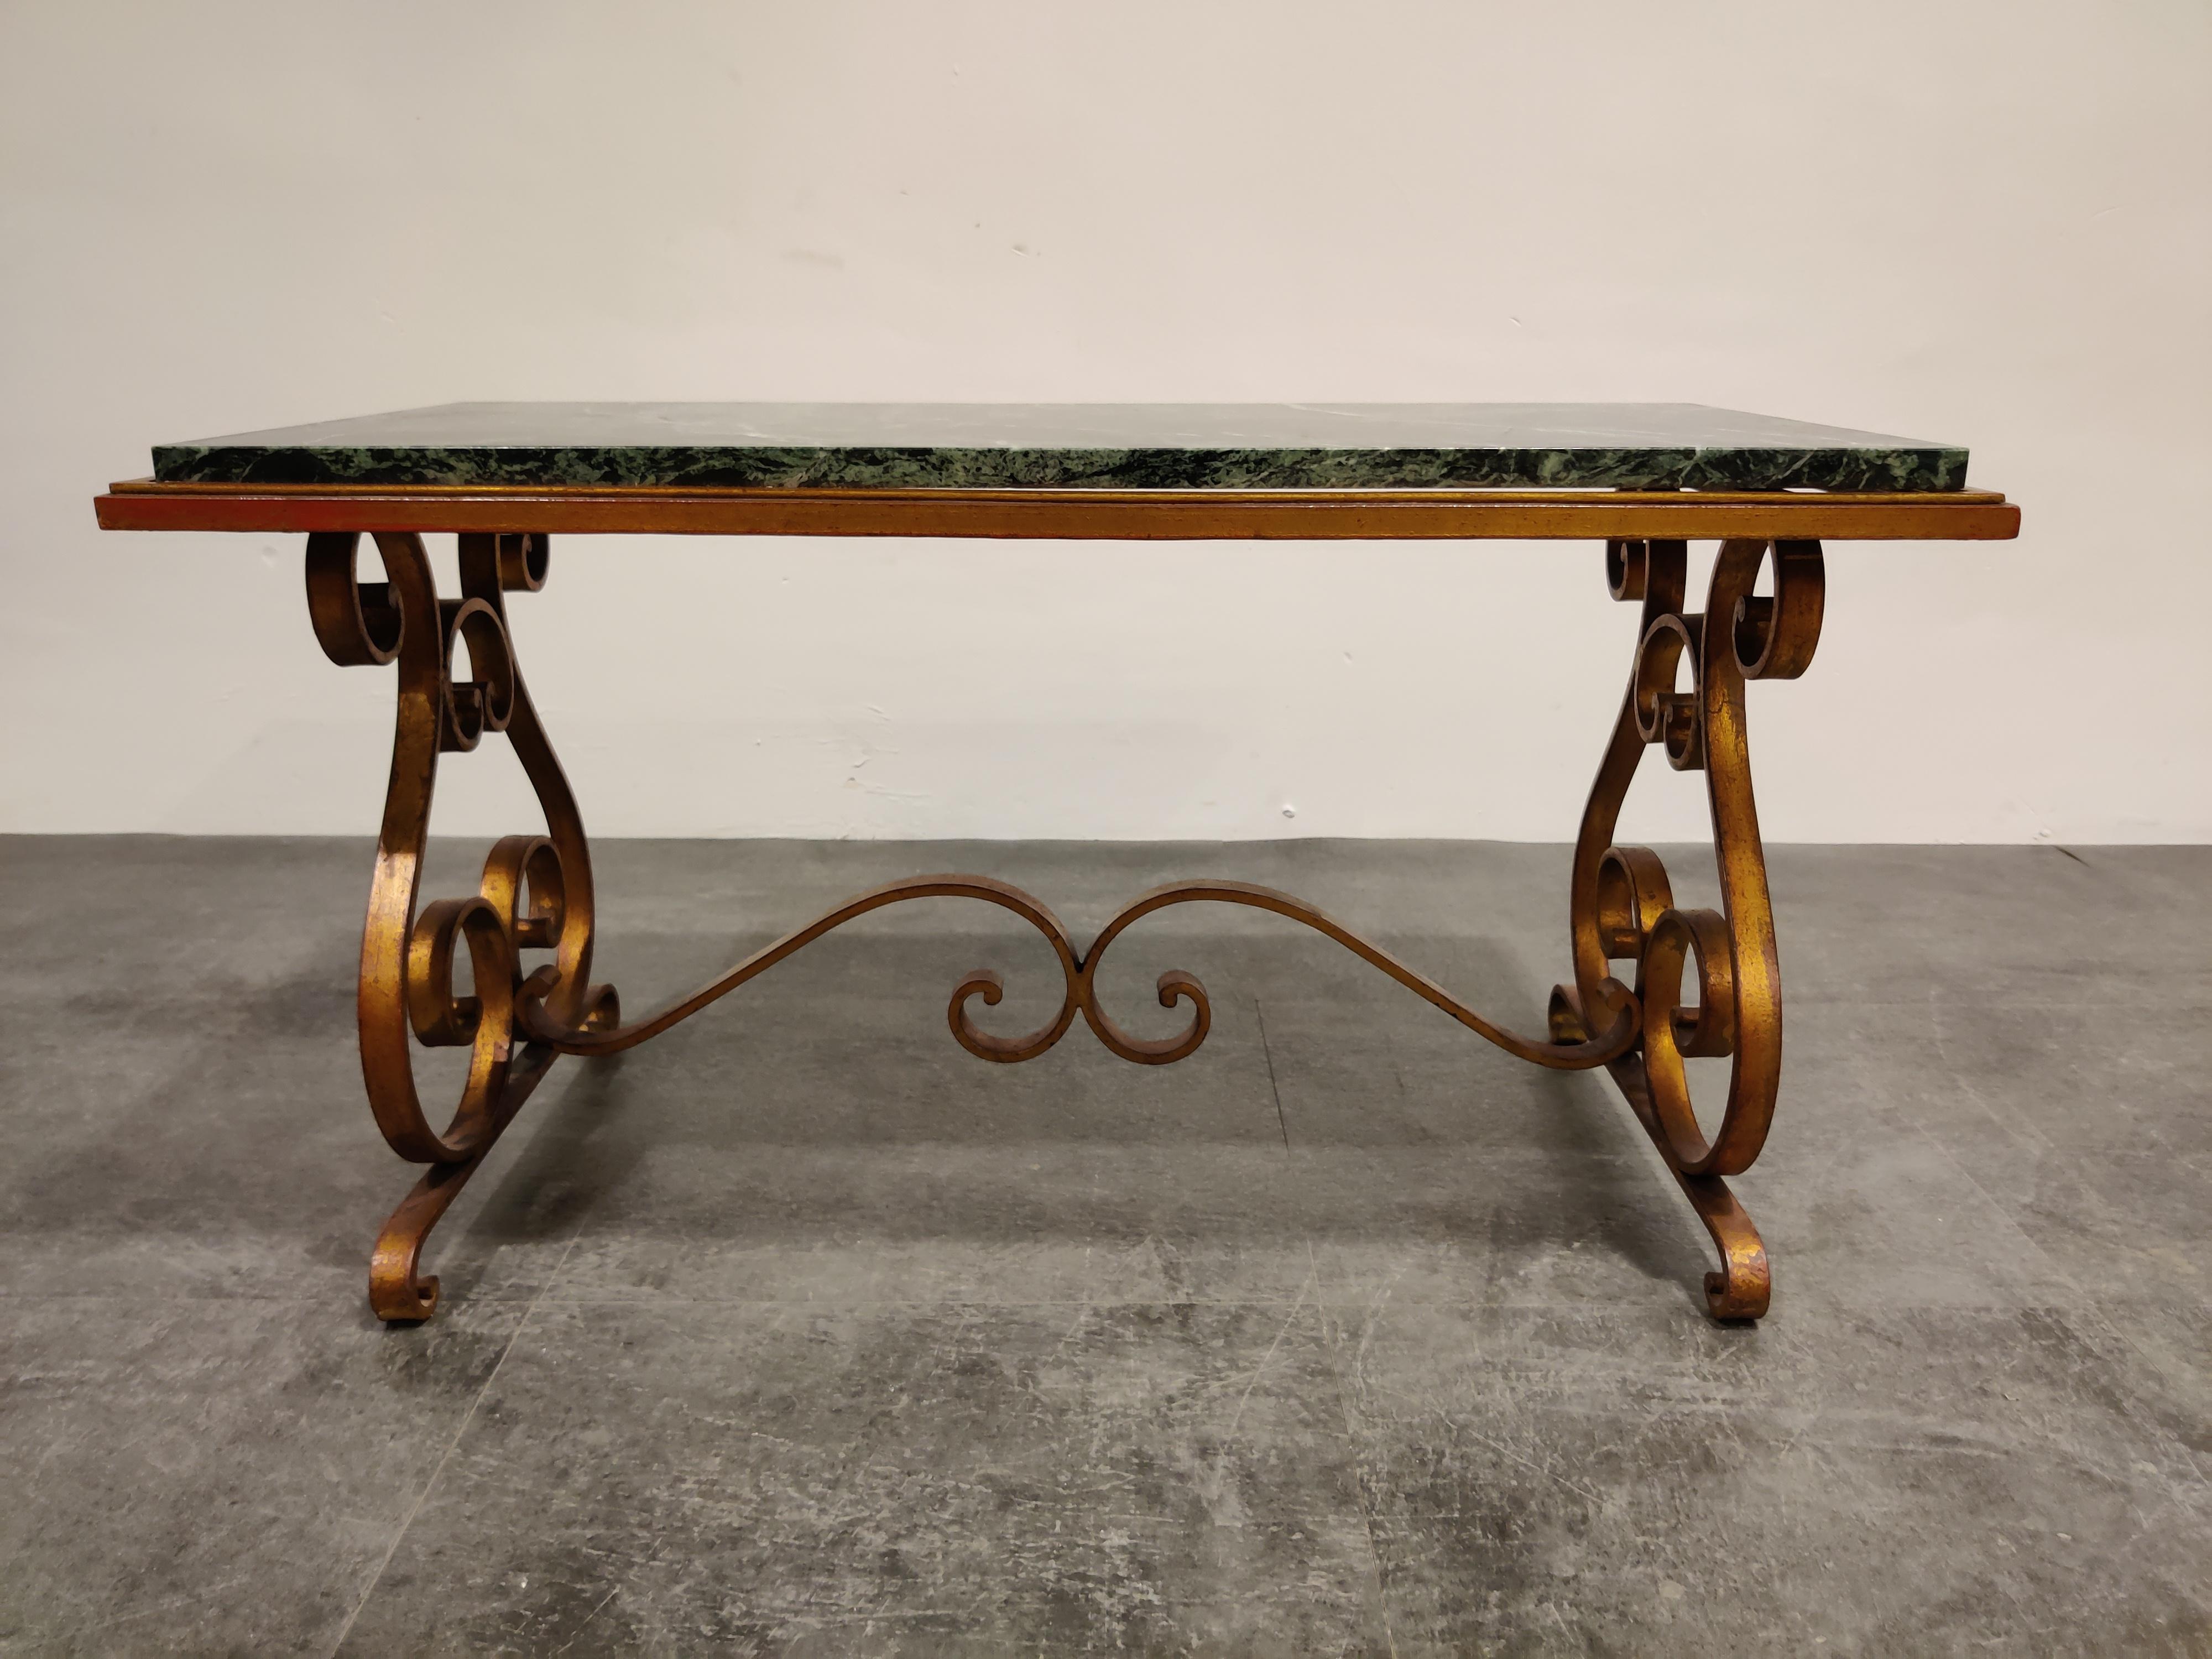 Beautiful midcentury wrought iron coffee table in the style of Raymond Subes.

Very well made gilded frame with a perfect dark green veined marble top.

The combination of materials and craftsmanship creates this beautiful elegant coffee